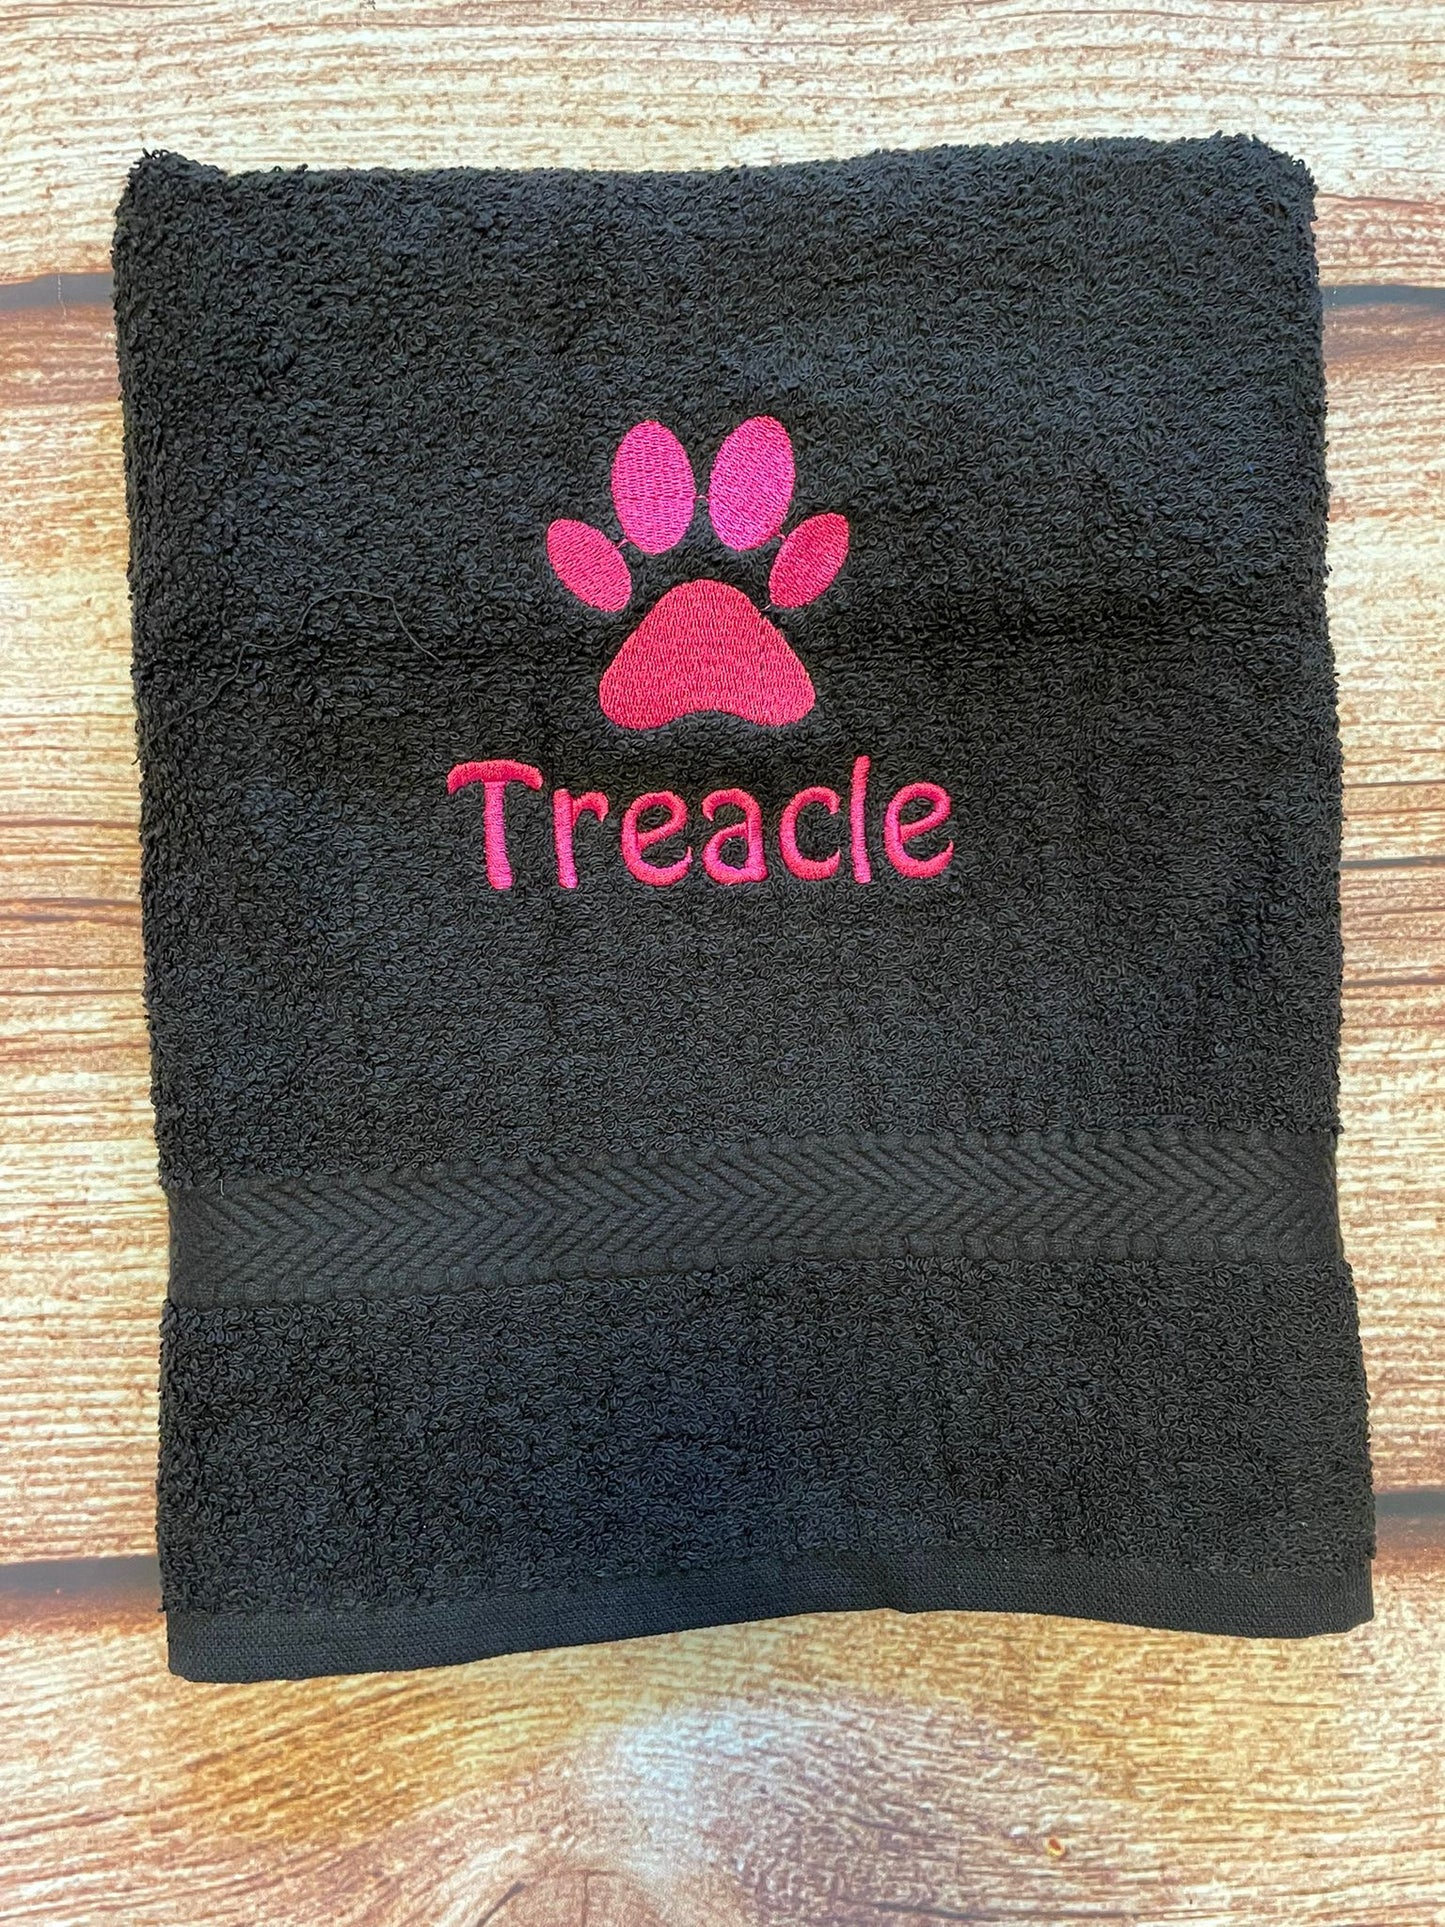 Dog towel, personalised with embroidered paw print and pet name. Ideal gift.